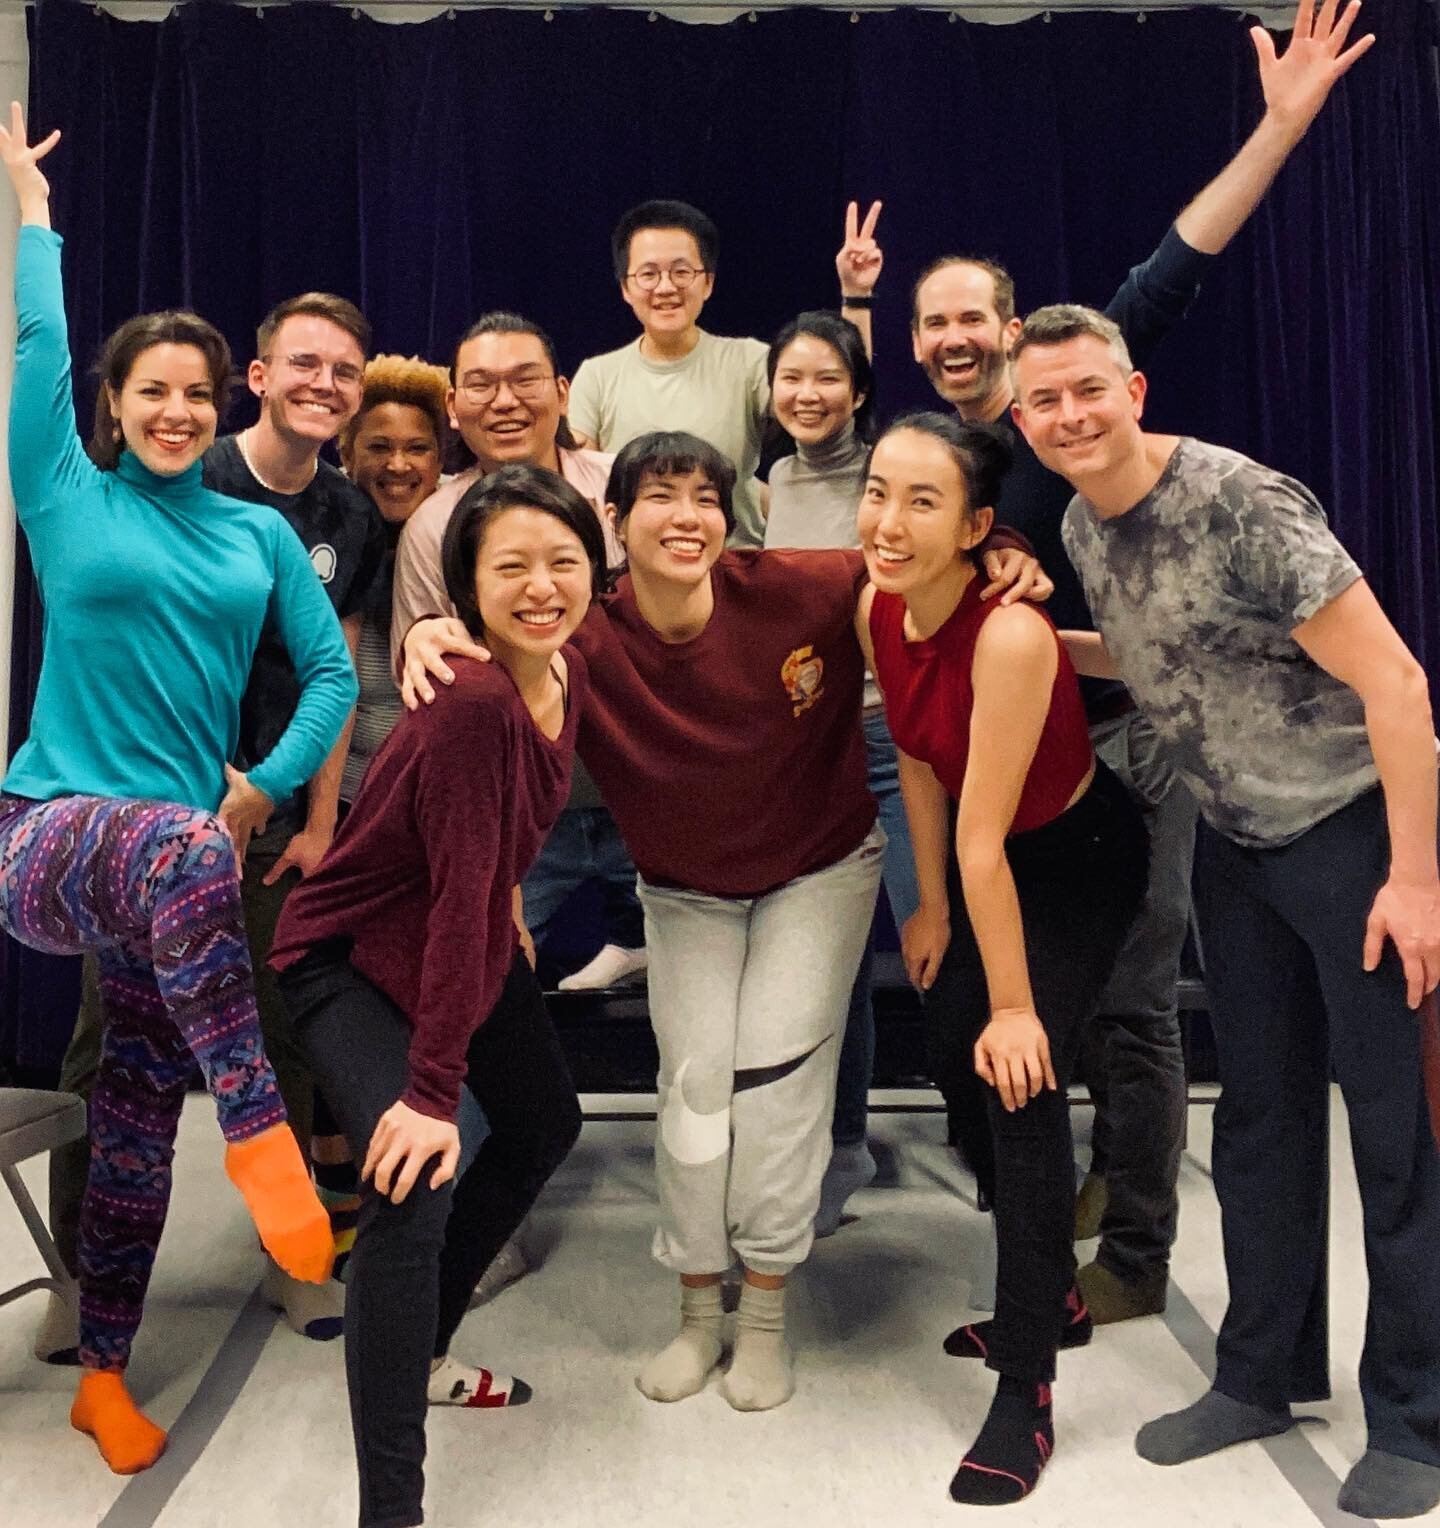 NYC Queer Playback Theater &amp; NY Mandarin Playback are excited to bring you a collaborative virtual playback performance on Sat Apr 1 at 7 &amp; 10pm EDT! We are hoping to bridge a connection with you across cultures and borders, to hear stories o